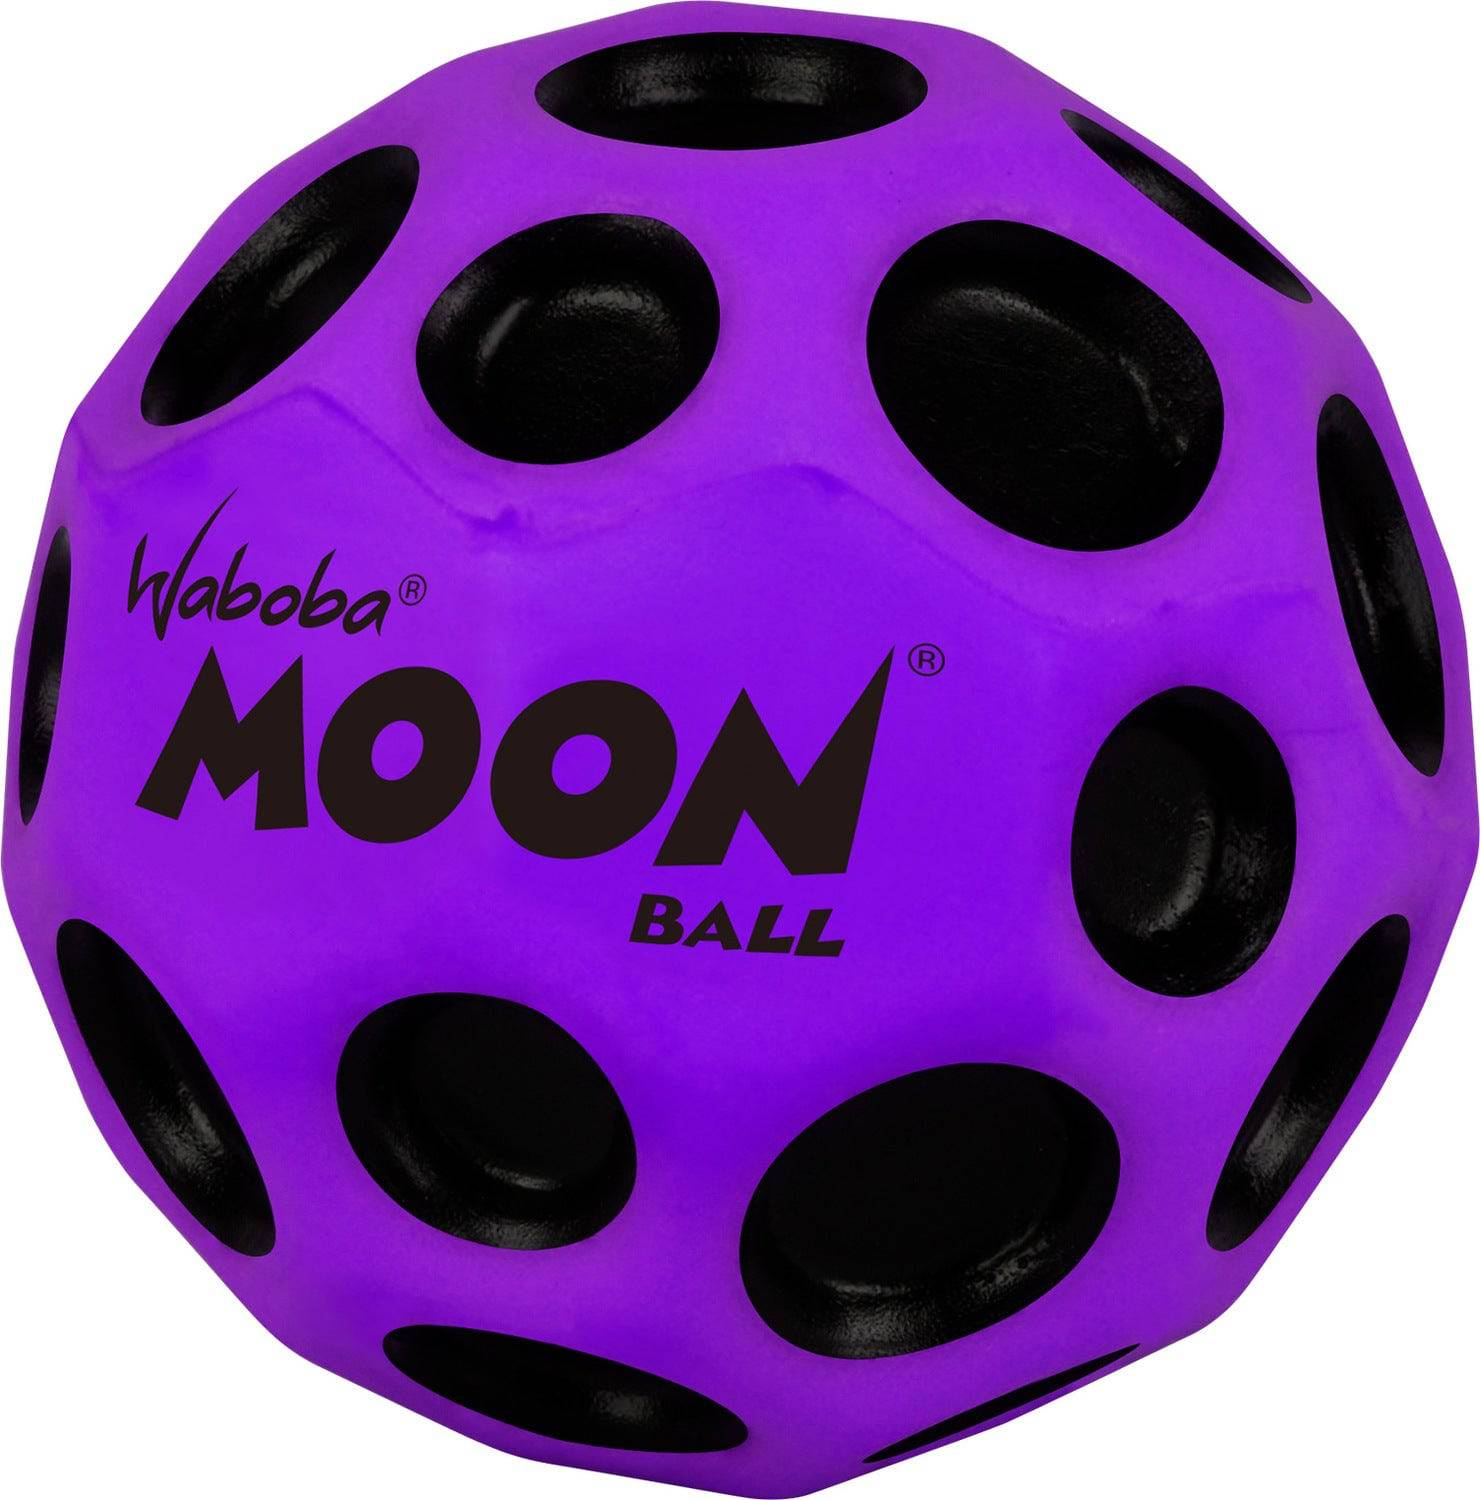 Moon Ball - Assorted Colors - A Child's Delight